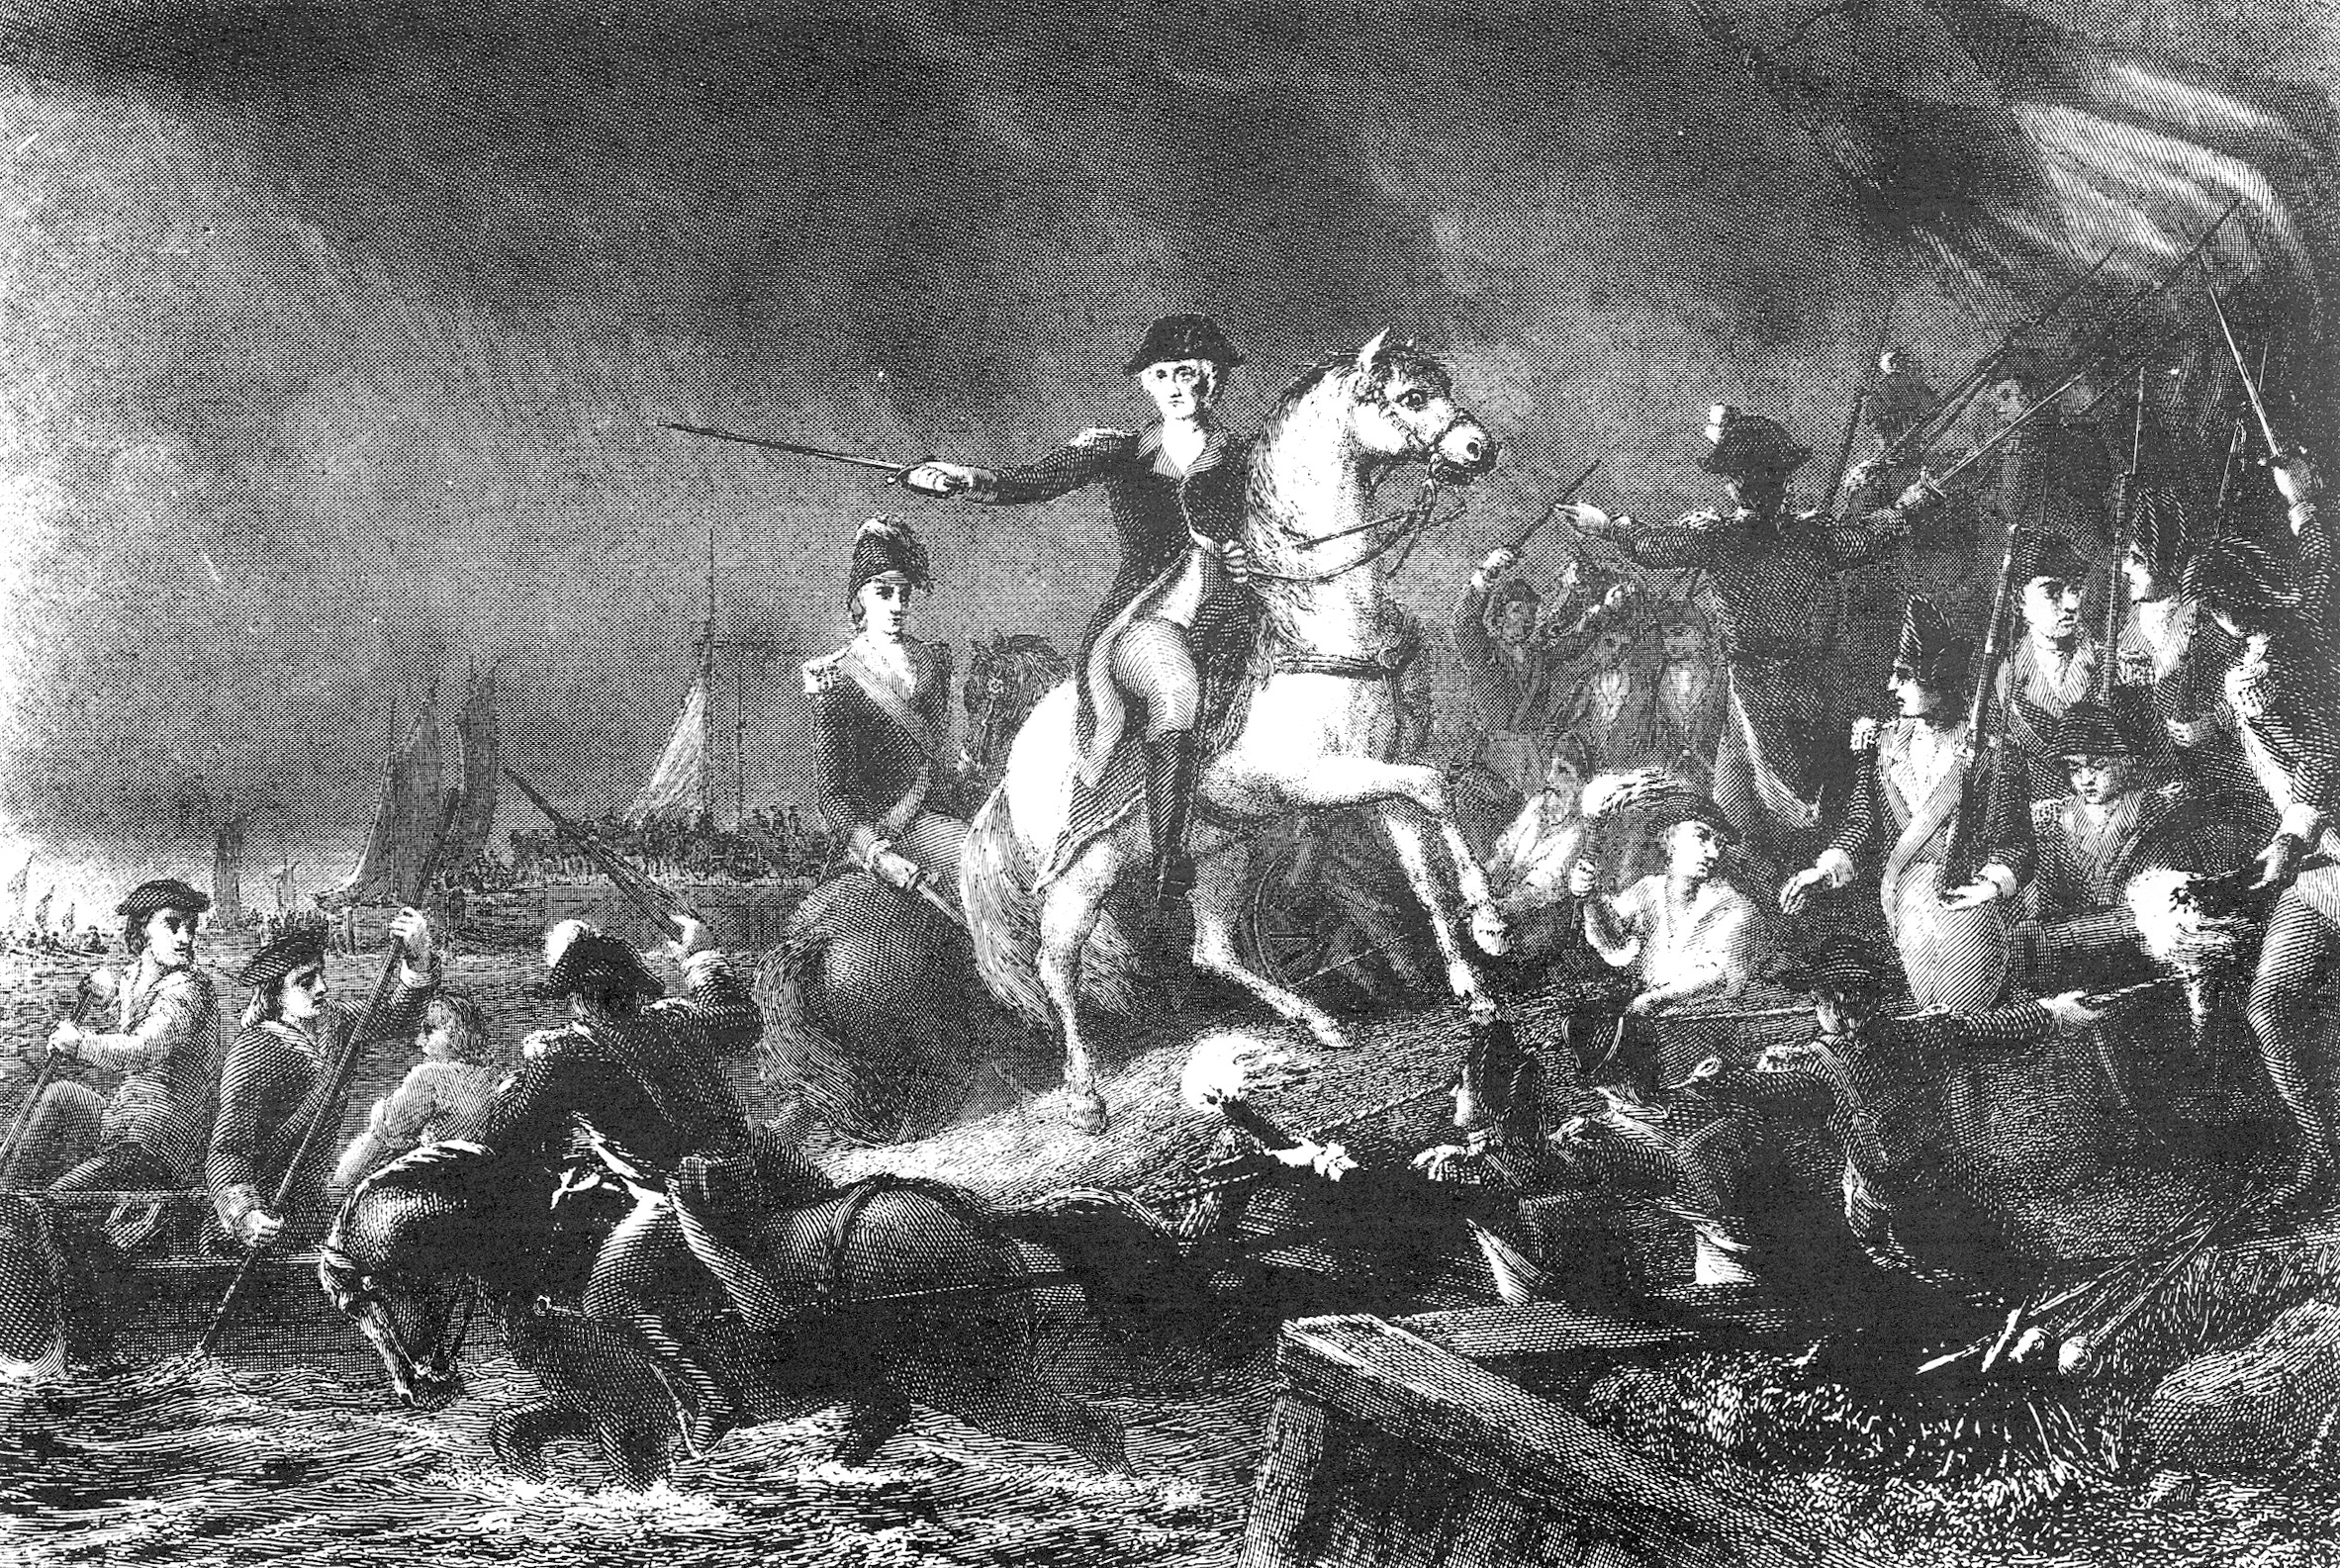 A depiction of Washington directing the retreat across the East River from Brooklyn Heights to Manhattan Island. There was a fog, and the winds became favorable, but the men were extraordinary in their silence and discipline. Even the British were impressed. In the morning the British army found a wholly vacant camp. The British had hoped to crush the drive for independence in this one enveloping battle. They almost overran the whole American force, but the Rebel cause would live to fight another day.